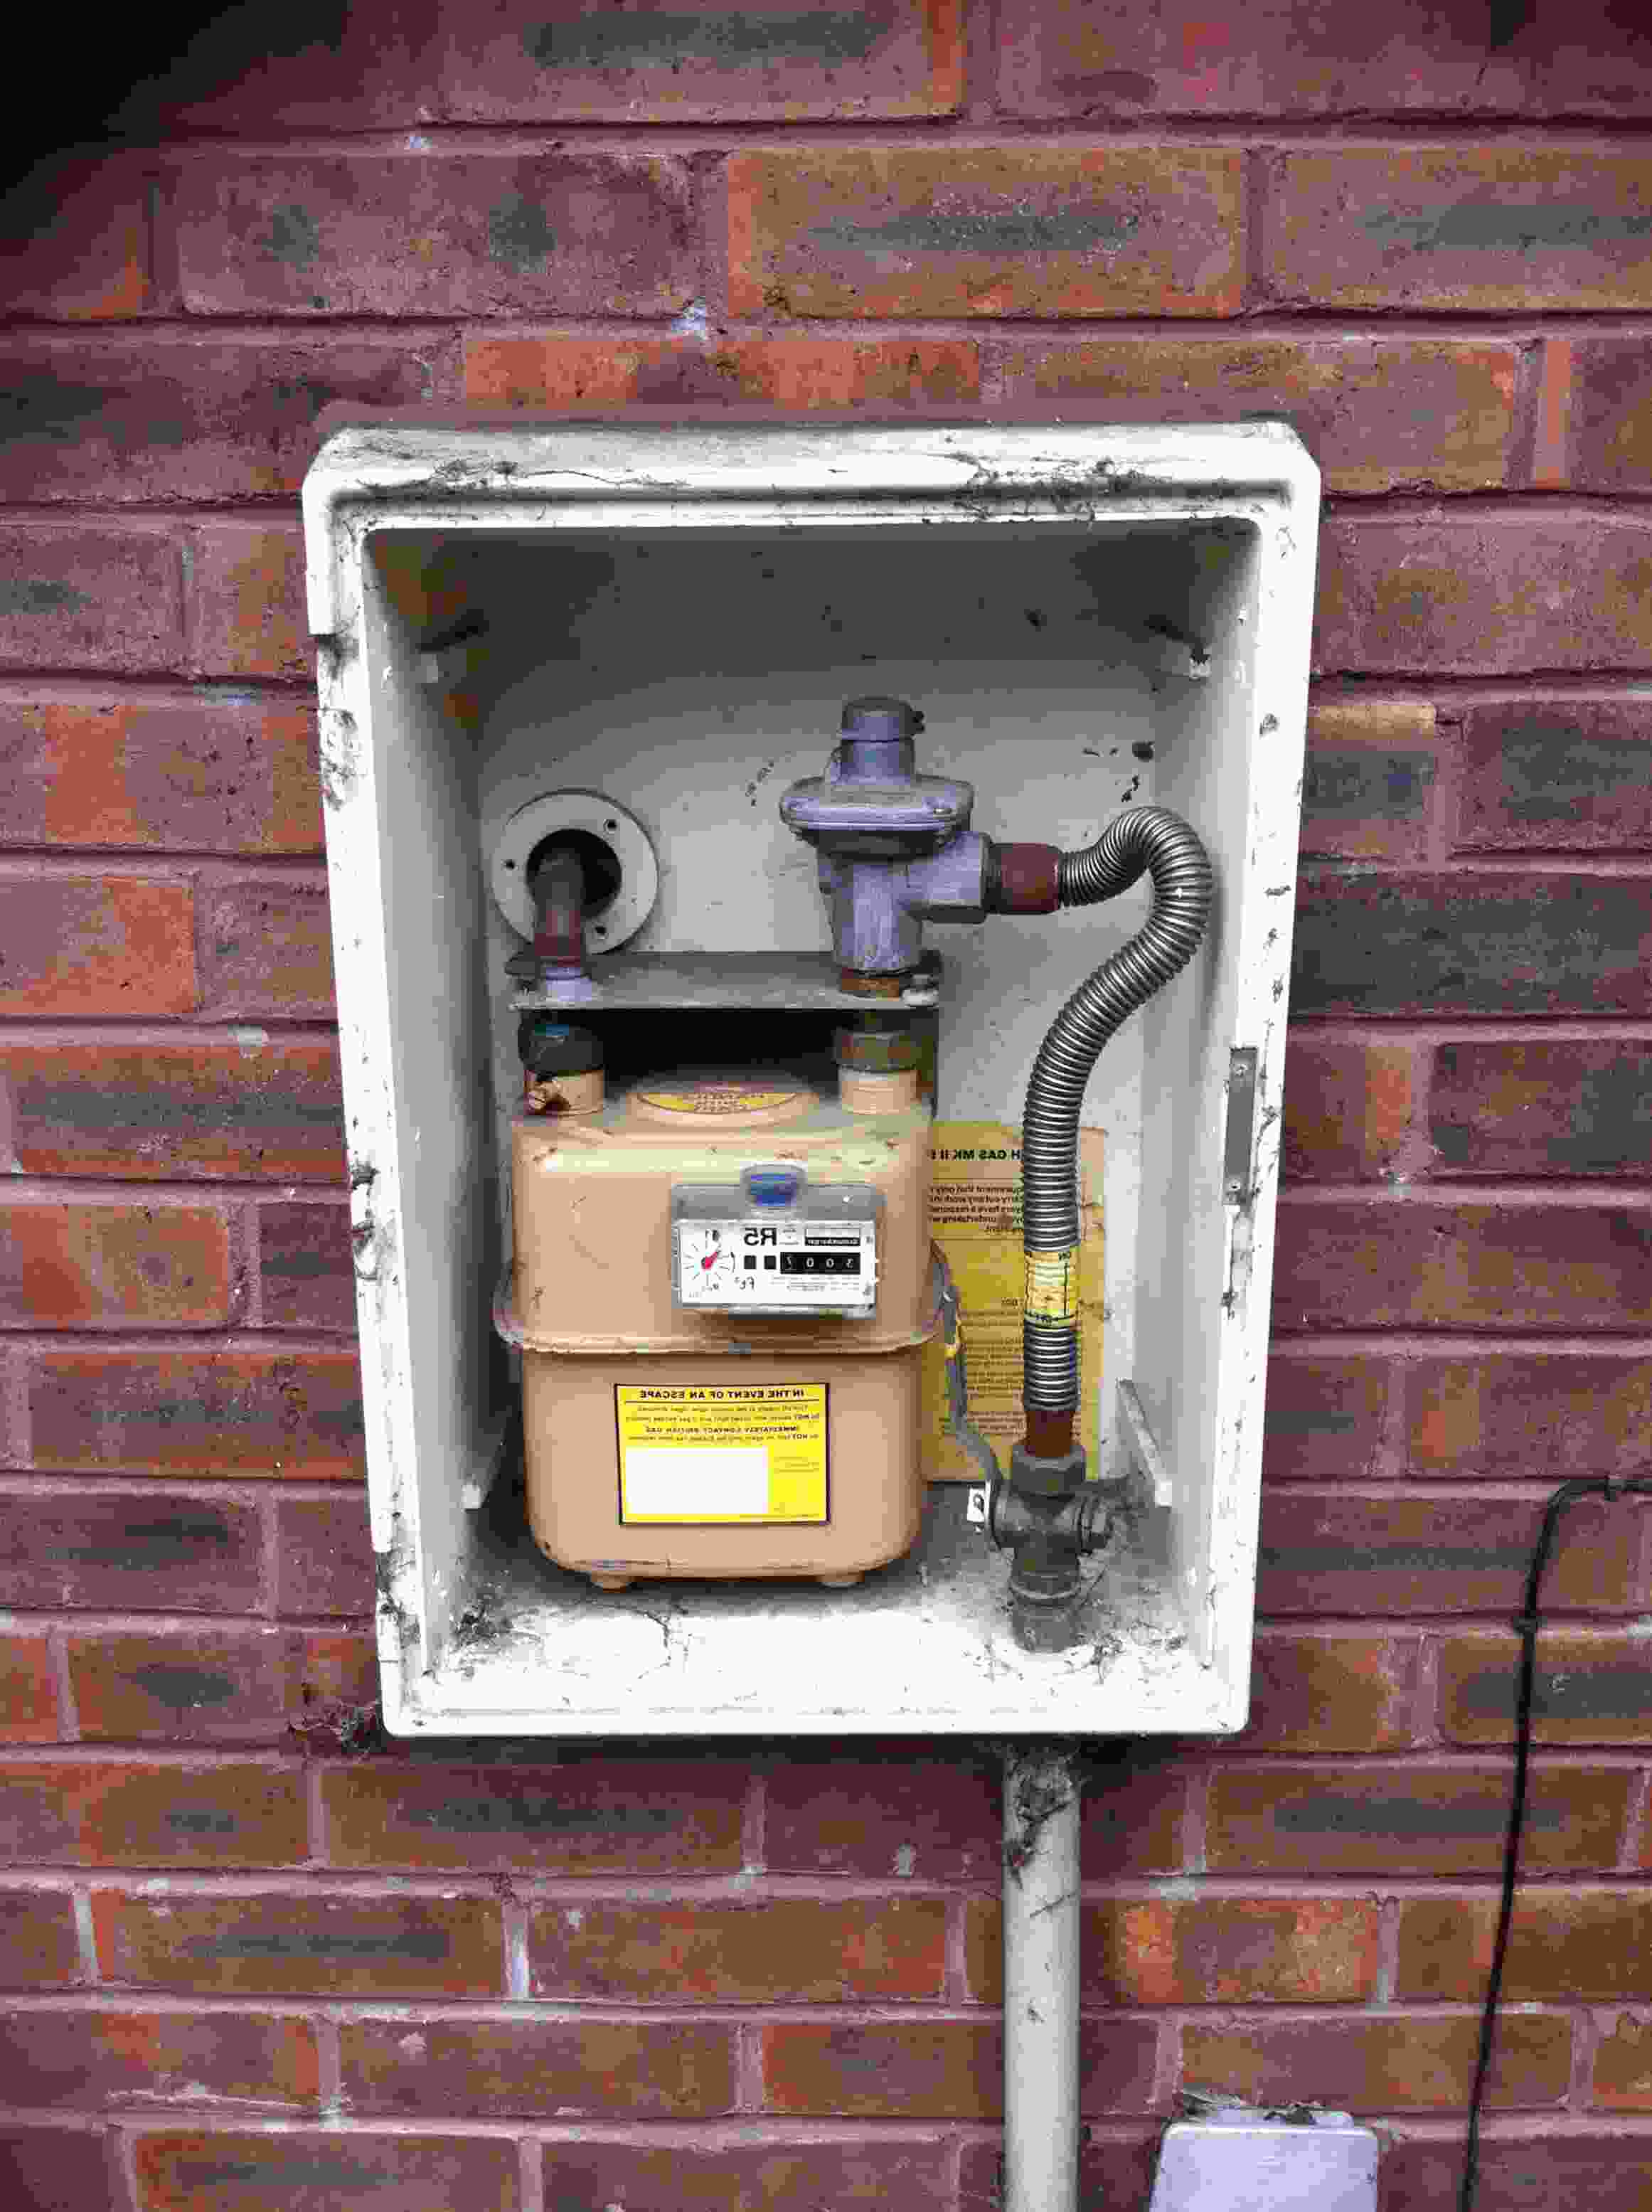 Box to cover gas meter